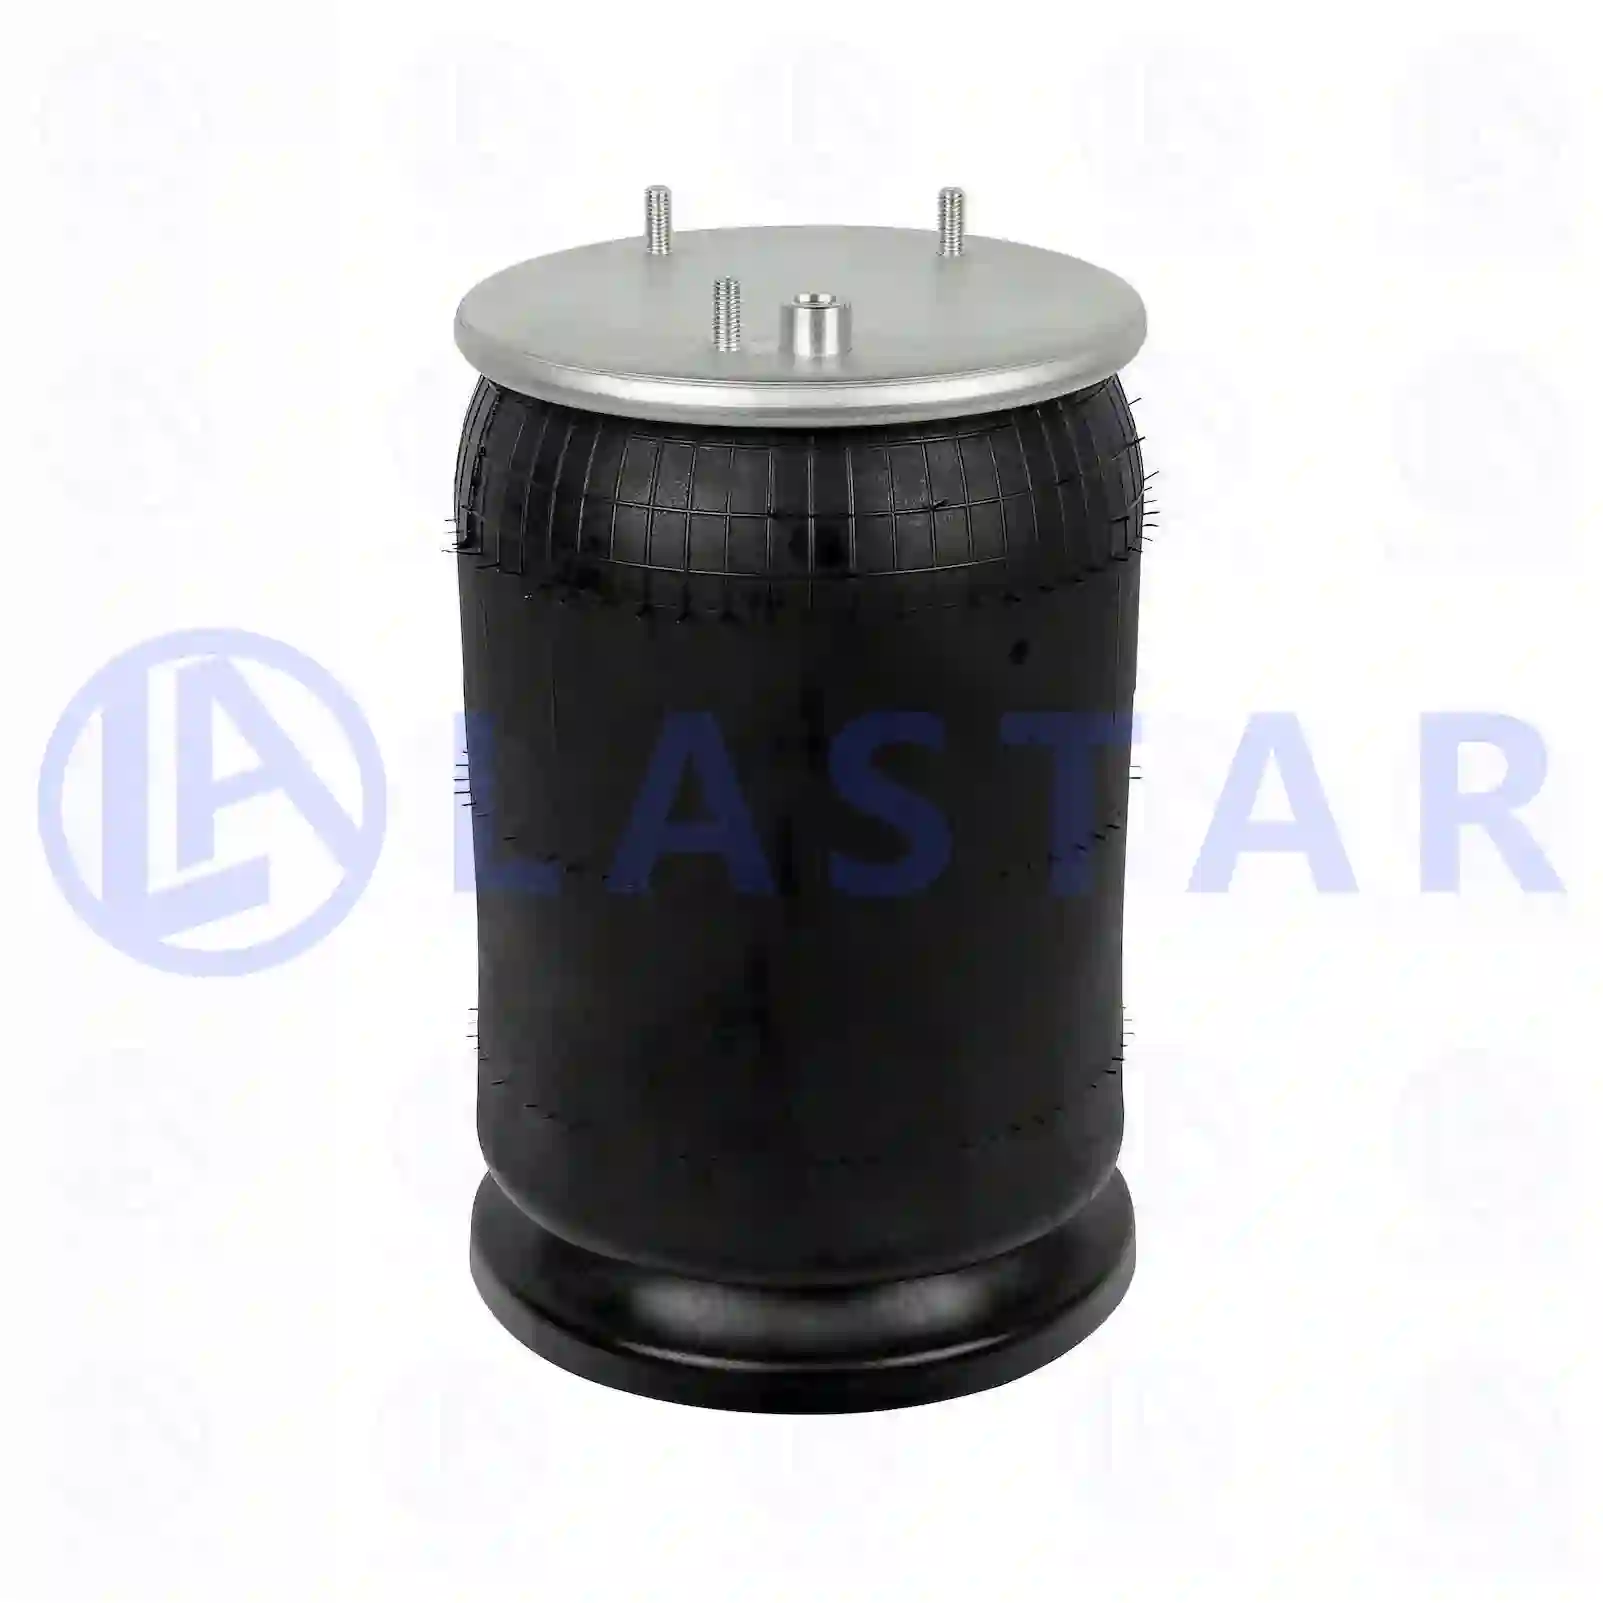 Air spring, with plastic piston, 77728506, 1448543, 1698436, ZG40722-0008, , , ||  77728506 Lastar Spare Part | Truck Spare Parts, Auotomotive Spare Parts Air spring, with plastic piston, 77728506, 1448543, 1698436, ZG40722-0008, , , ||  77728506 Lastar Spare Part | Truck Spare Parts, Auotomotive Spare Parts